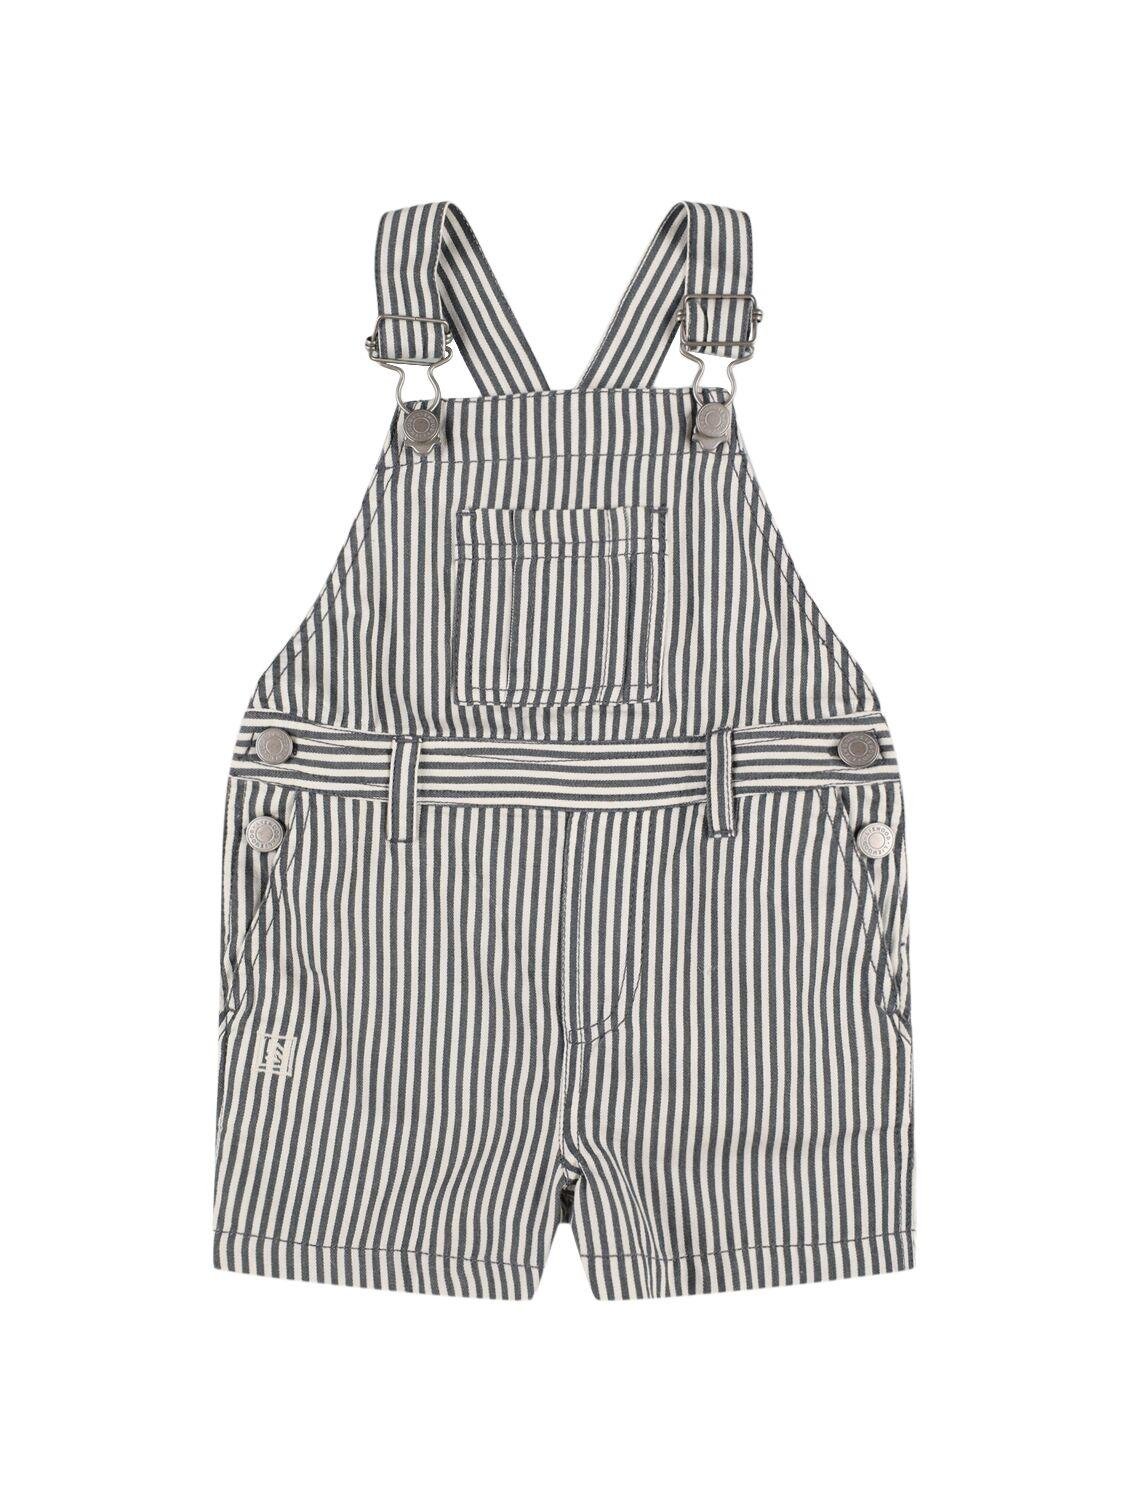 Striped Organic Cotton Overalls by LIEWOOD